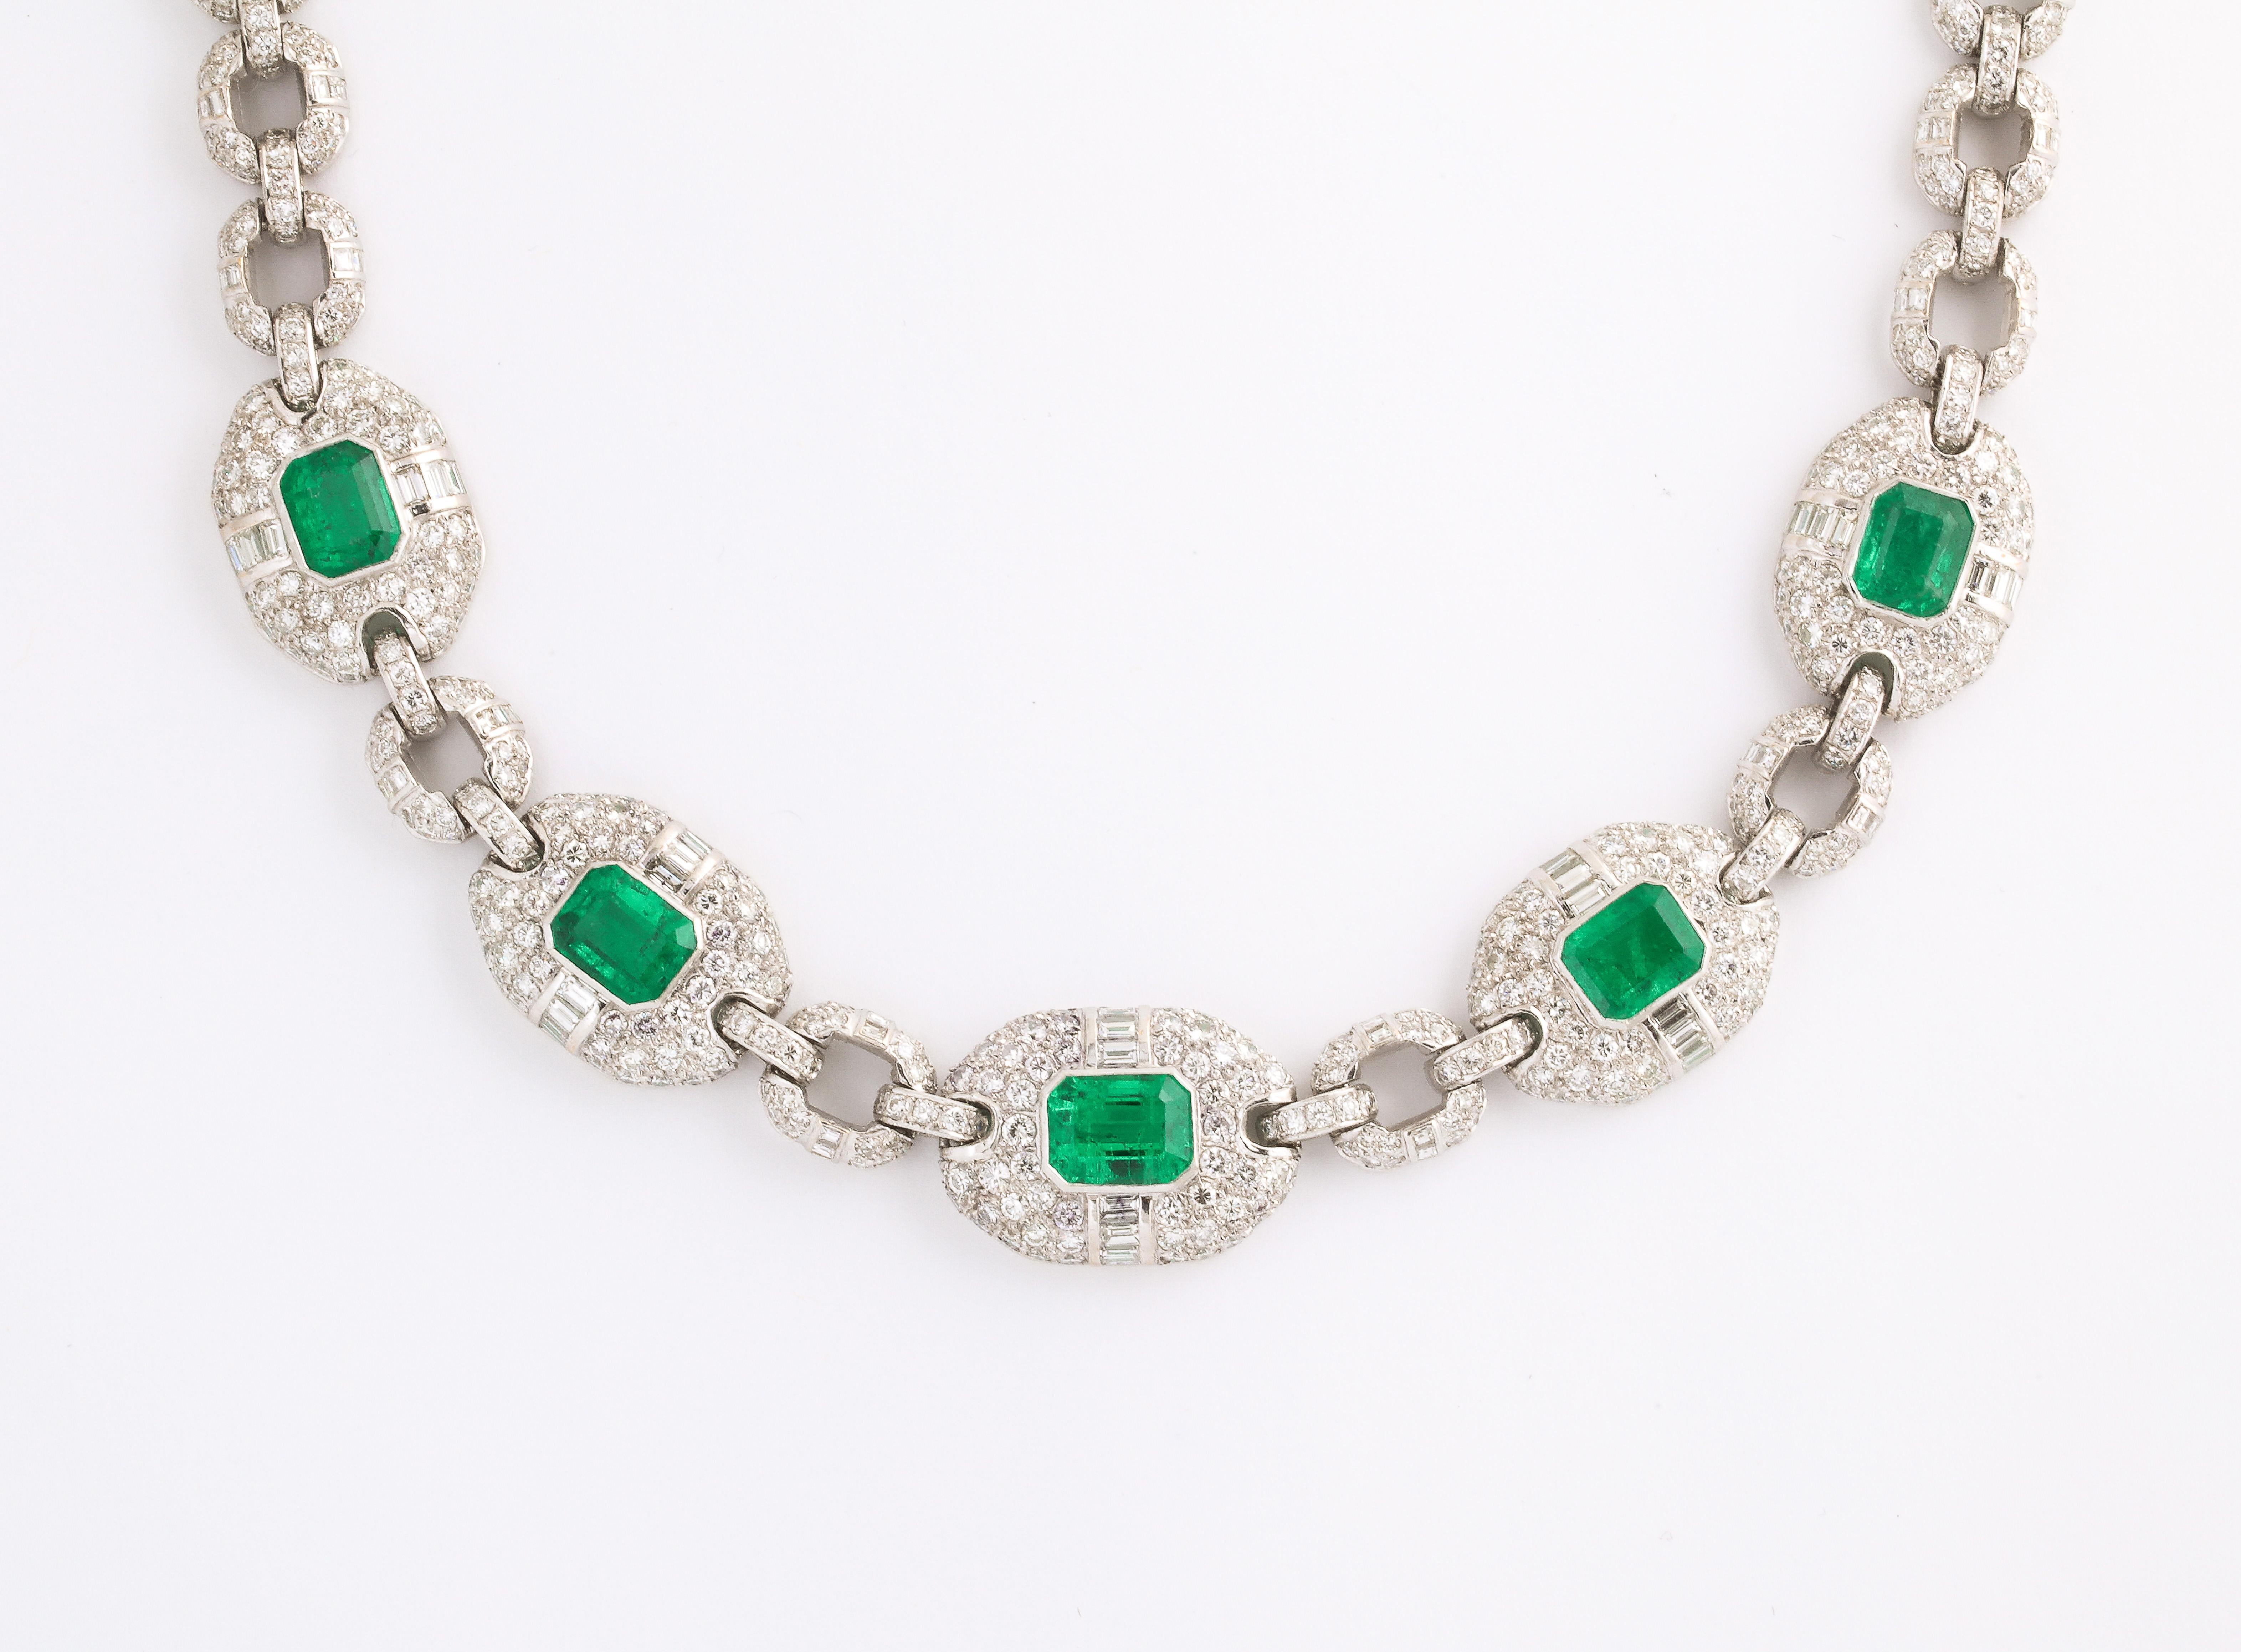 Certified Colombian Emerald & Diamond Necklace 
Approximate Diamond Weight: 36.00 Cts
Approximate Colombian emerald weight: 17 carats
Measurements: 15